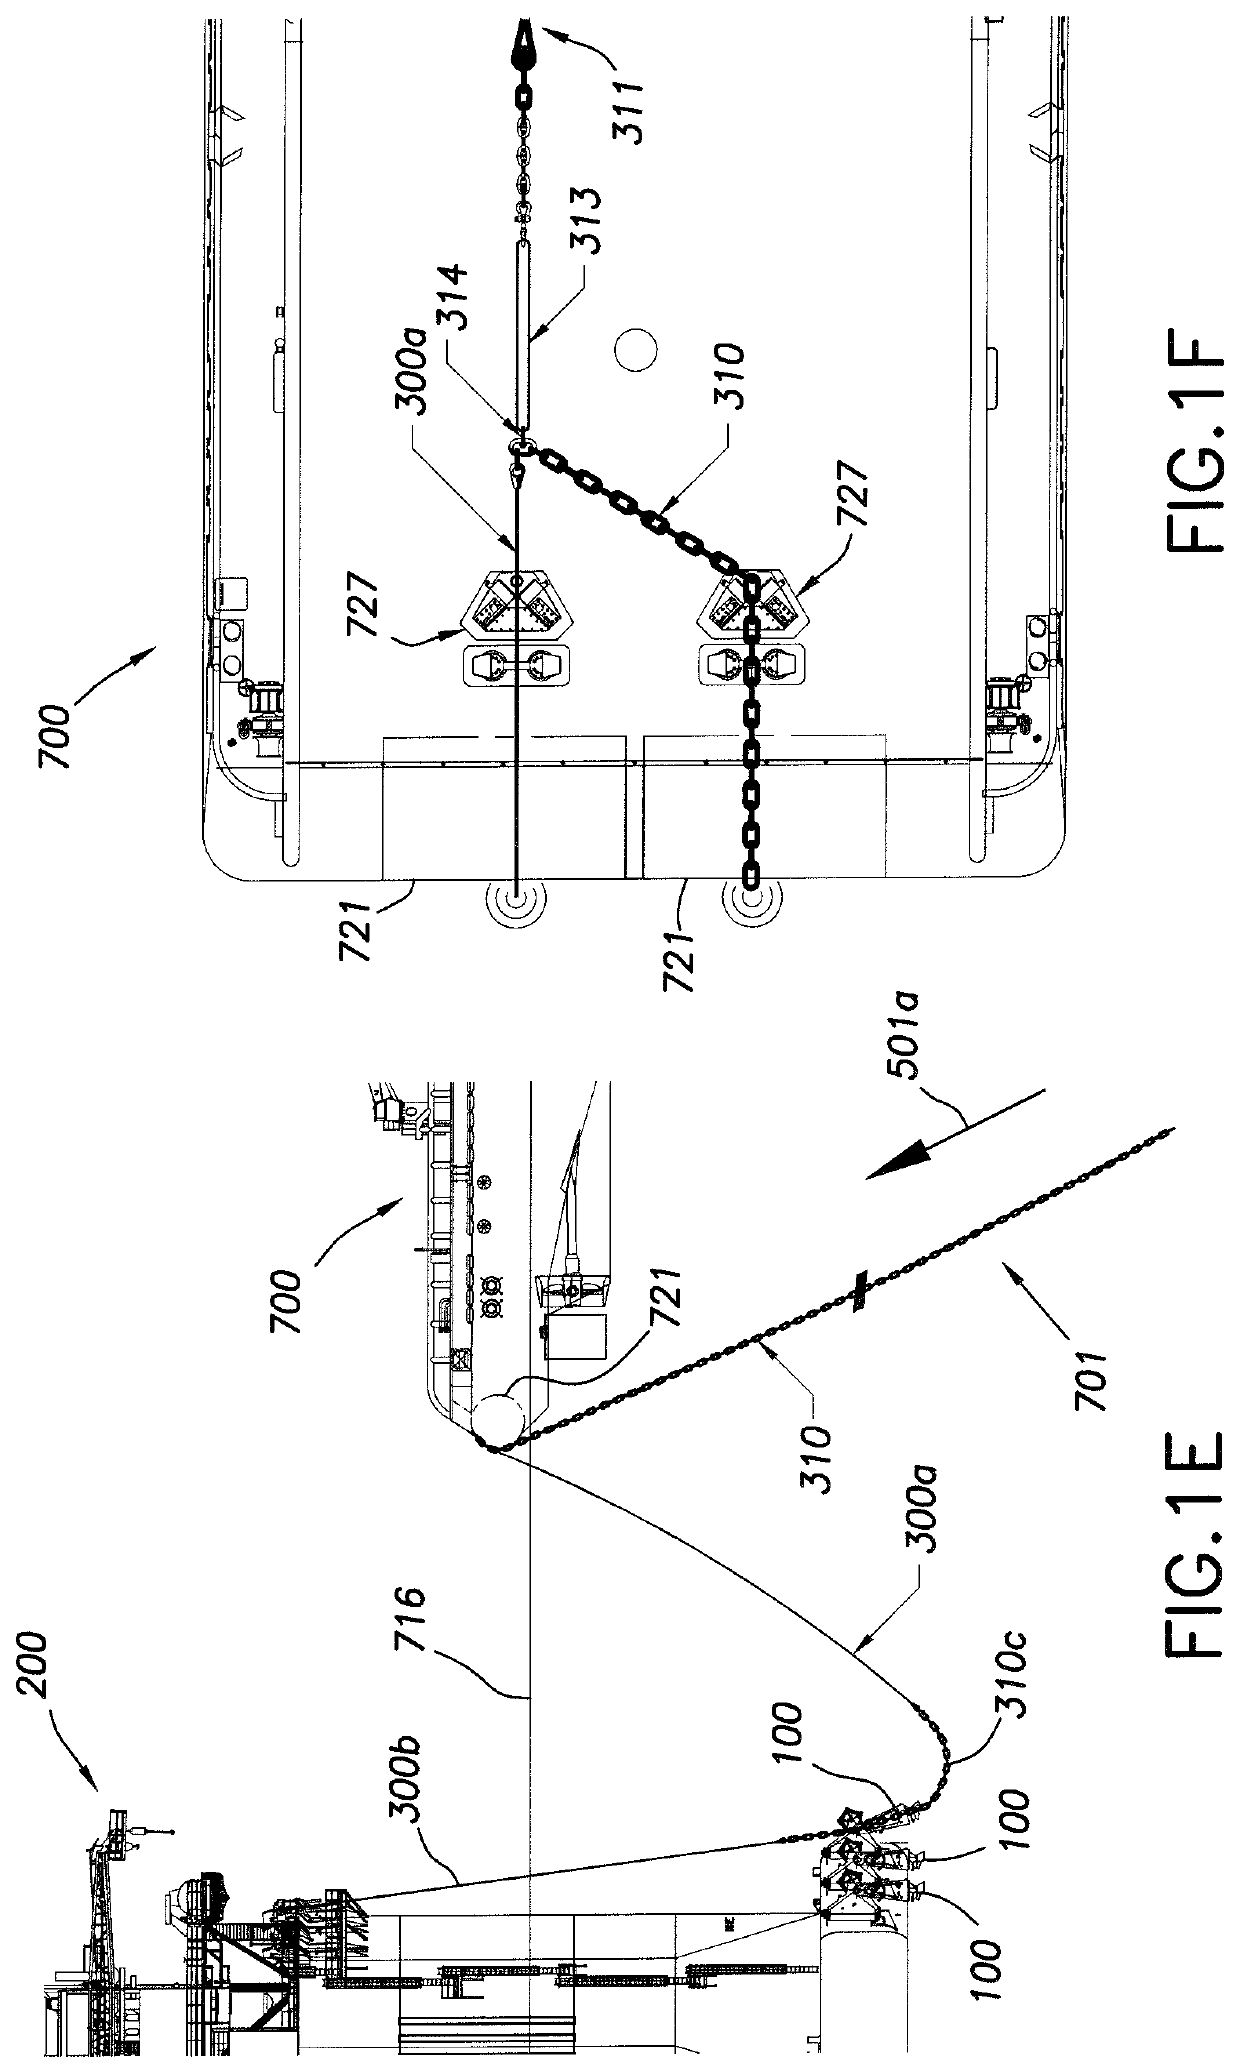 Mooring and tensioning methods, systems, and apparatus